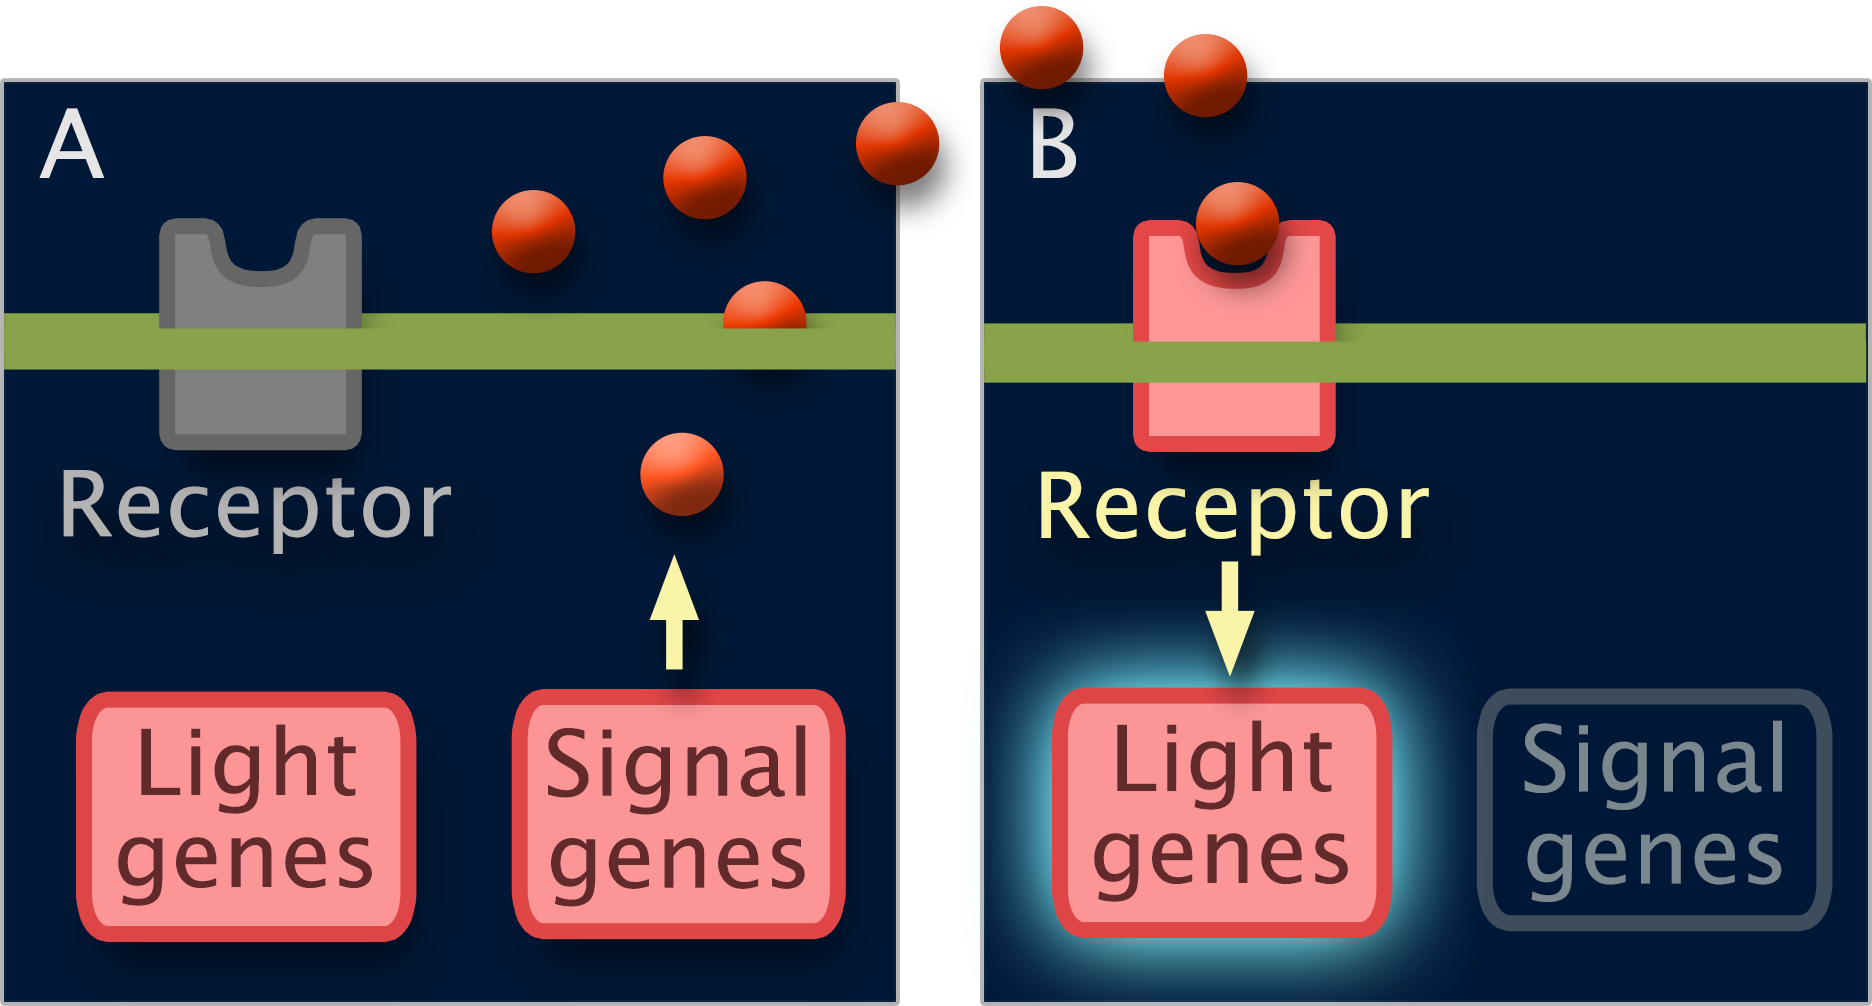 Signaling molecules from Strain A's Signal genes binds to Strain B's Receptor, turning on Strain B's Light genes.